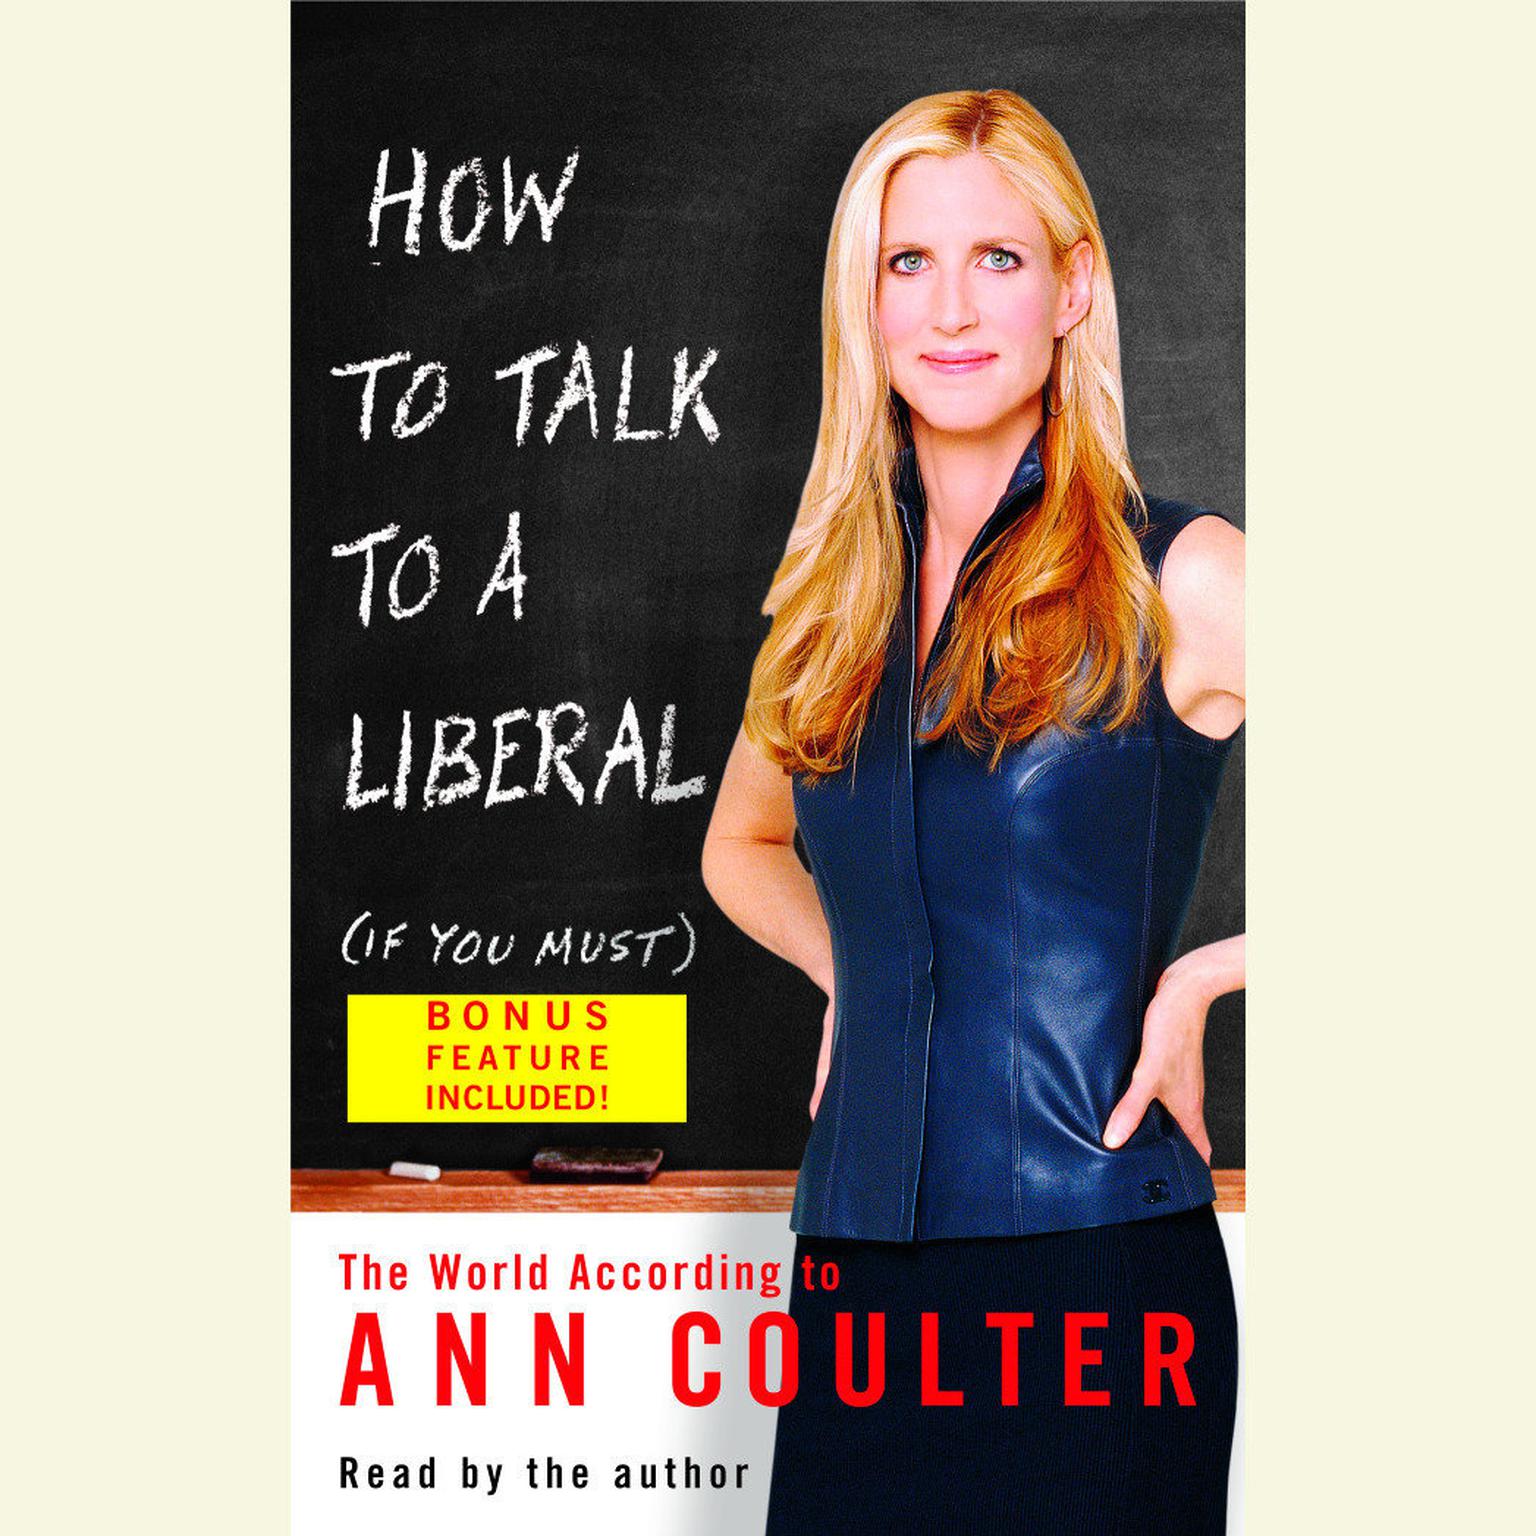 How to Talk to a Liberal (If You Must) (Abridged): The World According to Ann Coulter Audiobook, by Ann Coulter